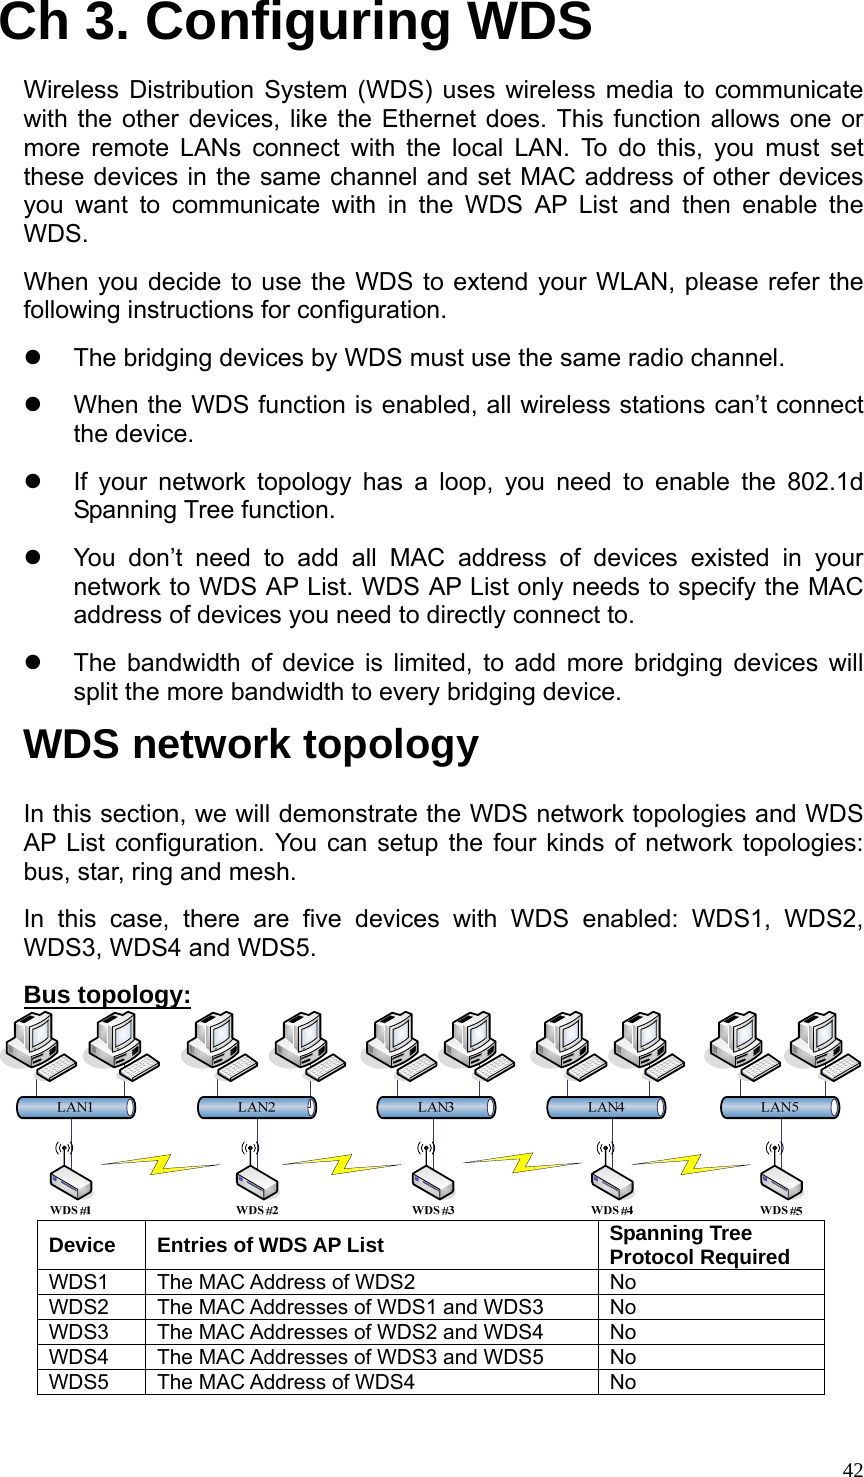  42Ch 3. Configuring WDS Wireless Distribution System (WDS) uses wireless media to communicate with the other devices, like the Ethernet does. This function allows one or more remote LANs connect with the local LAN. To do this, you must set these devices in the same channel and set MAC address of other devices you want to communicate with in the WDS AP List and then enable the WDS.  When you decide to use the WDS to extend your WLAN, please refer the following instructions for configuration. z  The bridging devices by WDS must use the same radio channel.   z  When the WDS function is enabled, all wireless stations can’t connect the device. z  If your network topology has a loop, you need to enable the 802.1d Spanning Tree function. z  You don’t need to add all MAC address of devices existed in your network to WDS AP List. WDS AP List only needs to specify the MAC address of devices you need to directly connect to. z  The bandwidth of device is limited, to add more bridging devices will split the more bandwidth to every bridging device. WDS network topology In this section, we will demonstrate the WDS network topologies and WDS AP List configuration. You can setup the four kinds of network topologies: bus, star, ring and mesh. In this case, there are five devices with WDS enabled: WDS1, WDS2, WDS3, WDS4 and WDS5. Bus topology:  Device  Entries of WDS AP List  Spanning Tree Protocol Required WDS1  The MAC Address of WDS2  No WDS2  The MAC Addresses of WDS1 and WDS3  No WDS3  The MAC Addresses of WDS2 and WDS4  No WDS4  The MAC Addresses of WDS3 and WDS5  No WDS5  The MAC Address of WDS4  No  